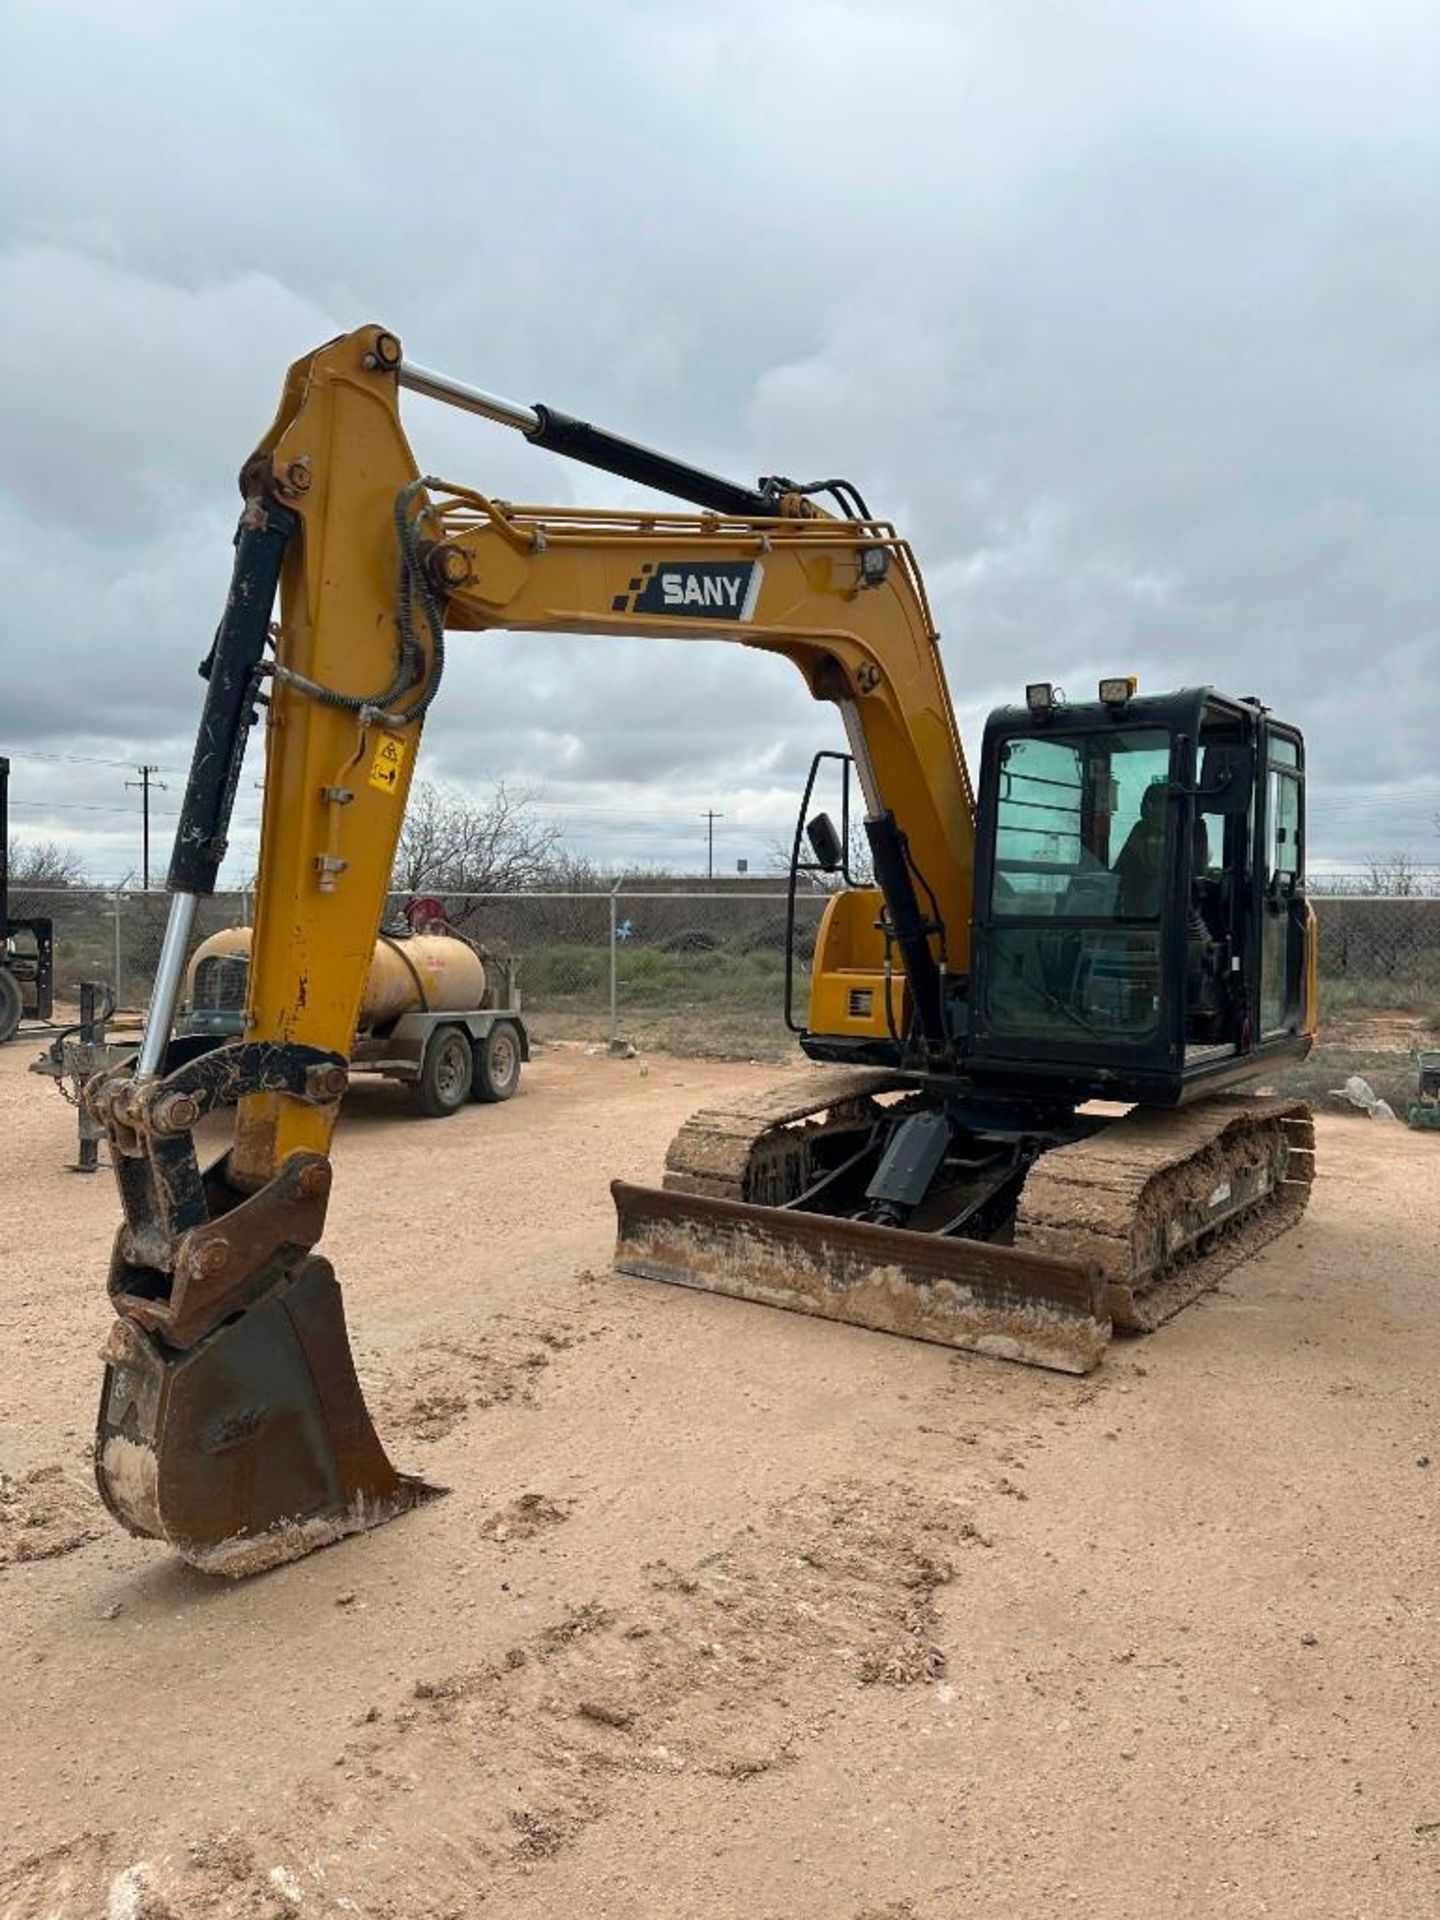 2019 Sany SY 95C Tracked Excavator, 2,309 Hours, 12" Tooth Bucket, Enclosed Cab, Diesel Engine, 8' H - Image 7 of 7